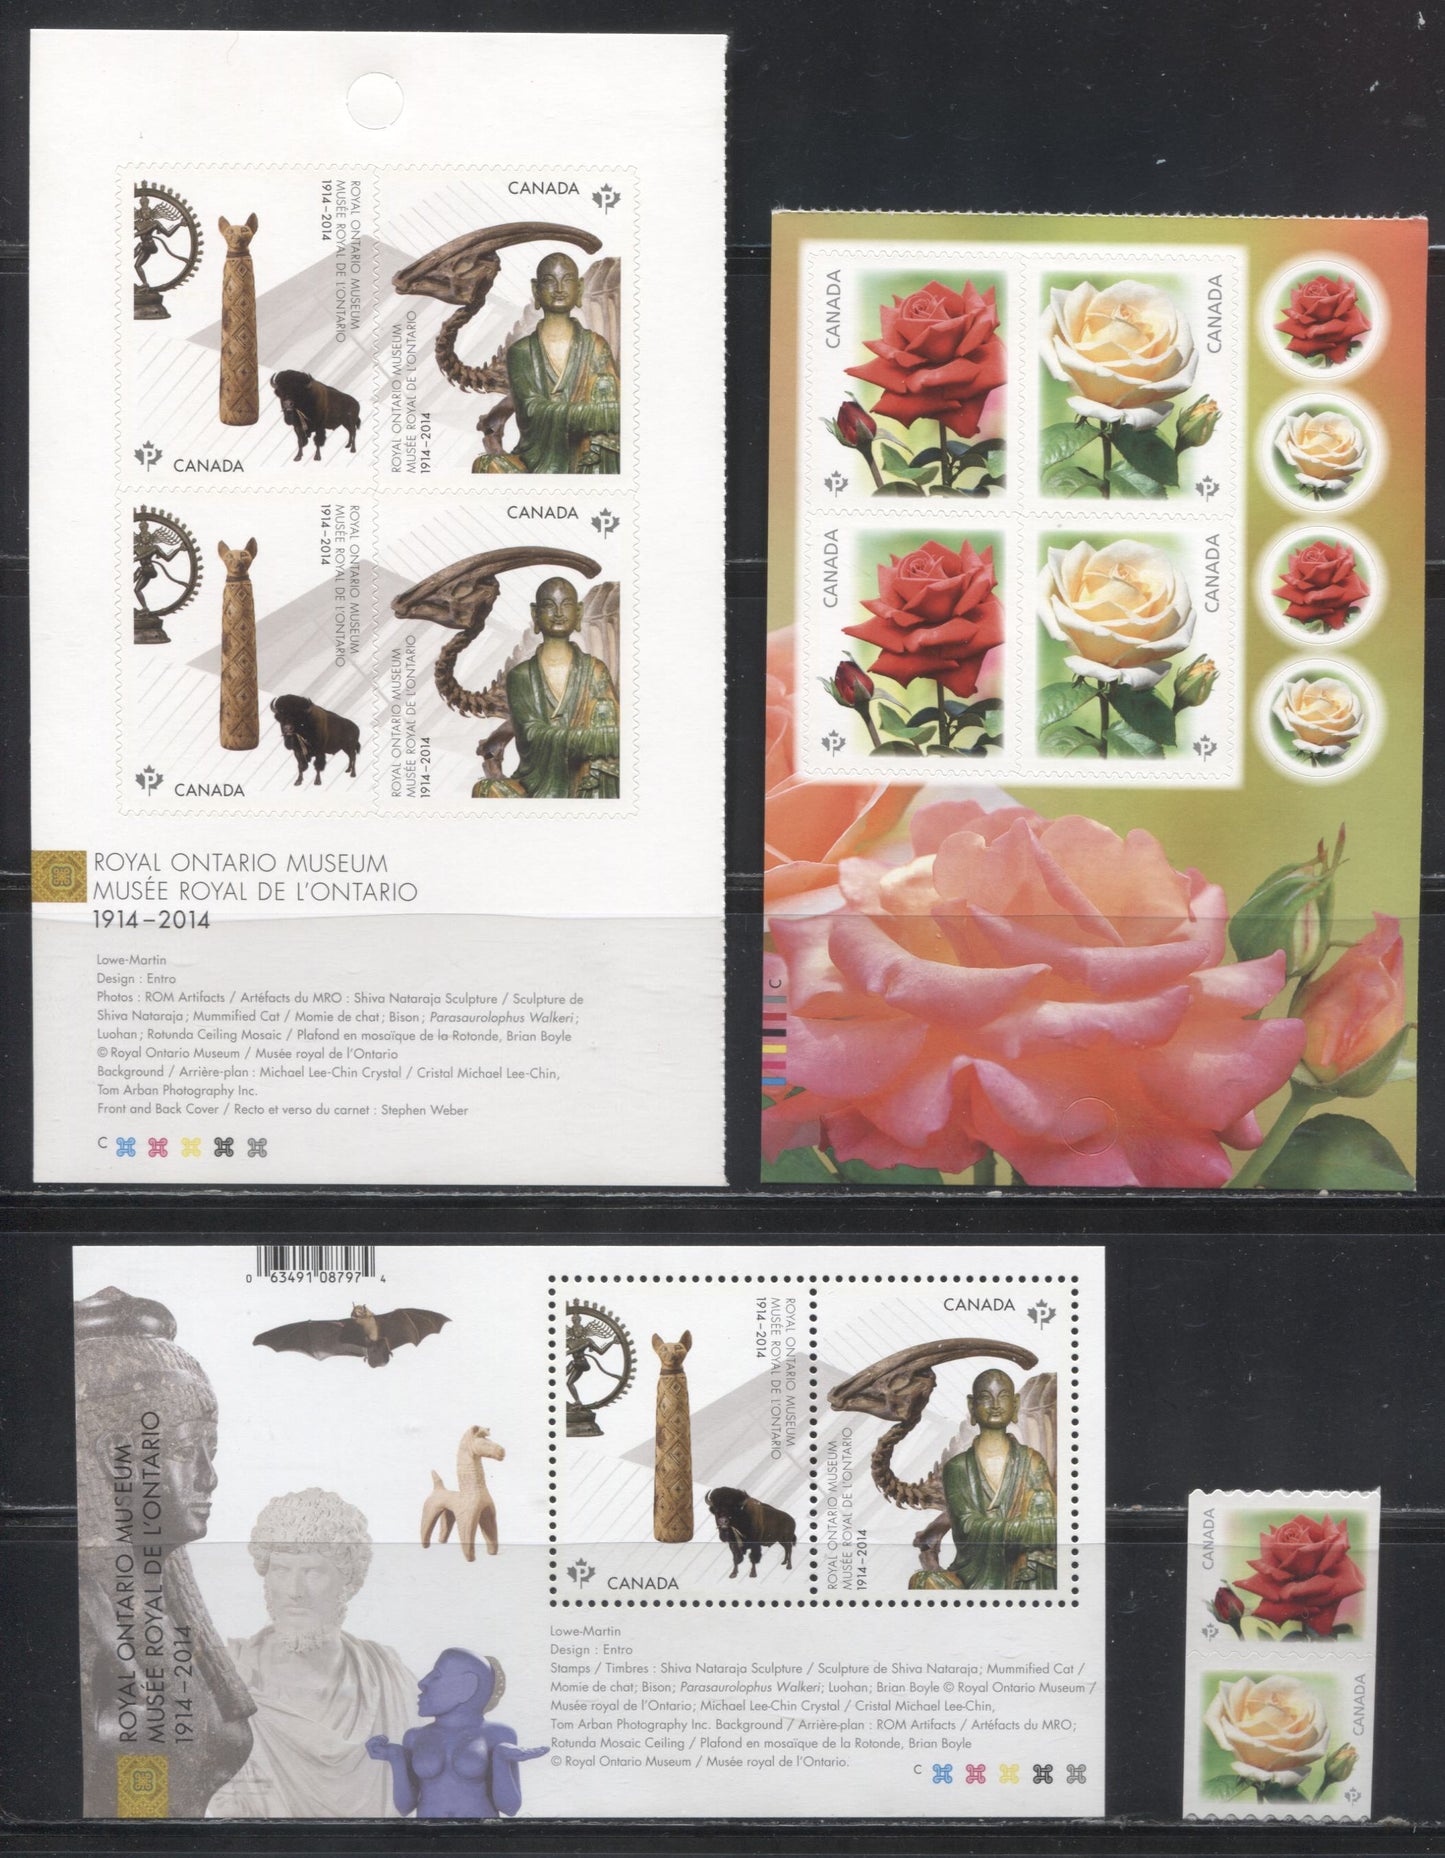 Lot 117 Canada #2724-2726, 2728-2731 2014 Royal Ontario Museum & Roses Issue, VFNH Souvenir Sheets, A Coil Pair and Booklet Panes of 4 on LF TRC Paper